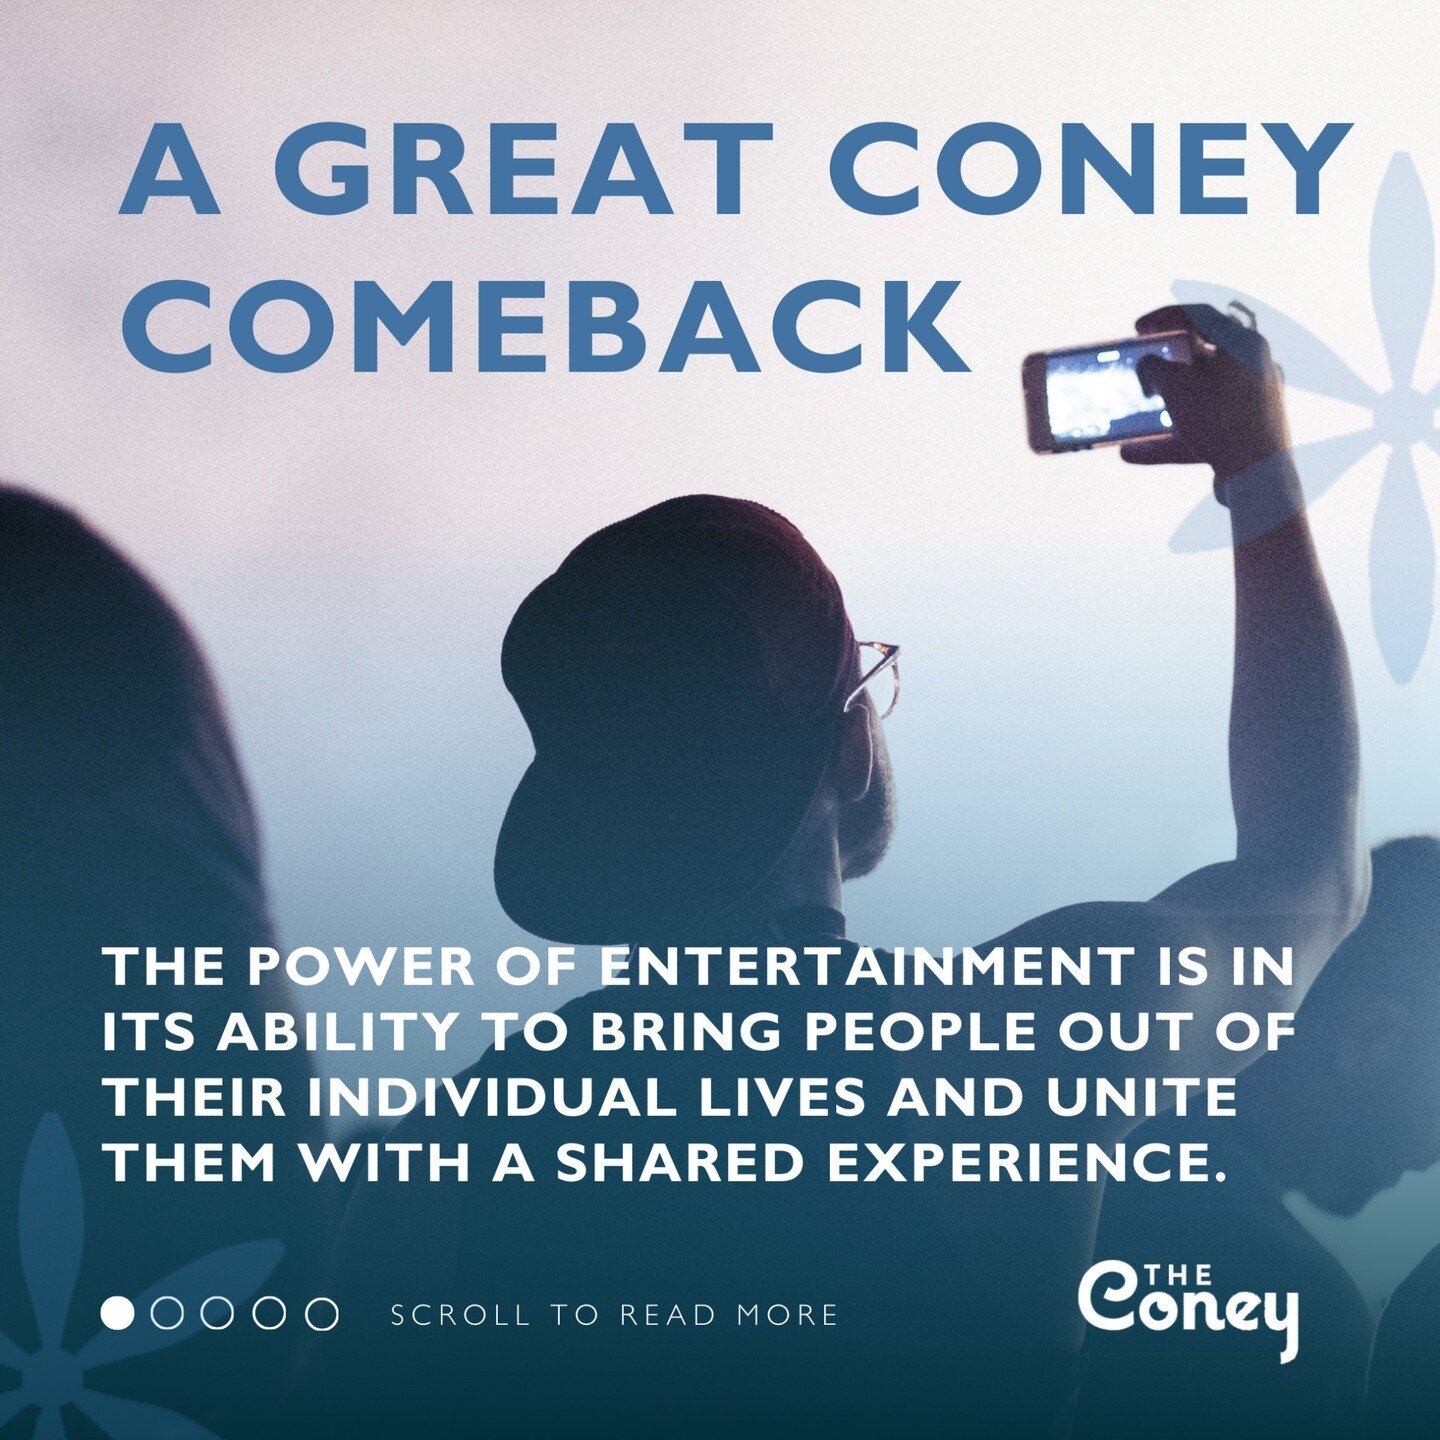 To anchor laughter, music and unforgettable experiences in our community, we are dedicated to bringing world-class entertainment to Coney Island.

Our vision to reinvigorate a timeless destination is fueled by an array of top-notch performances, vers